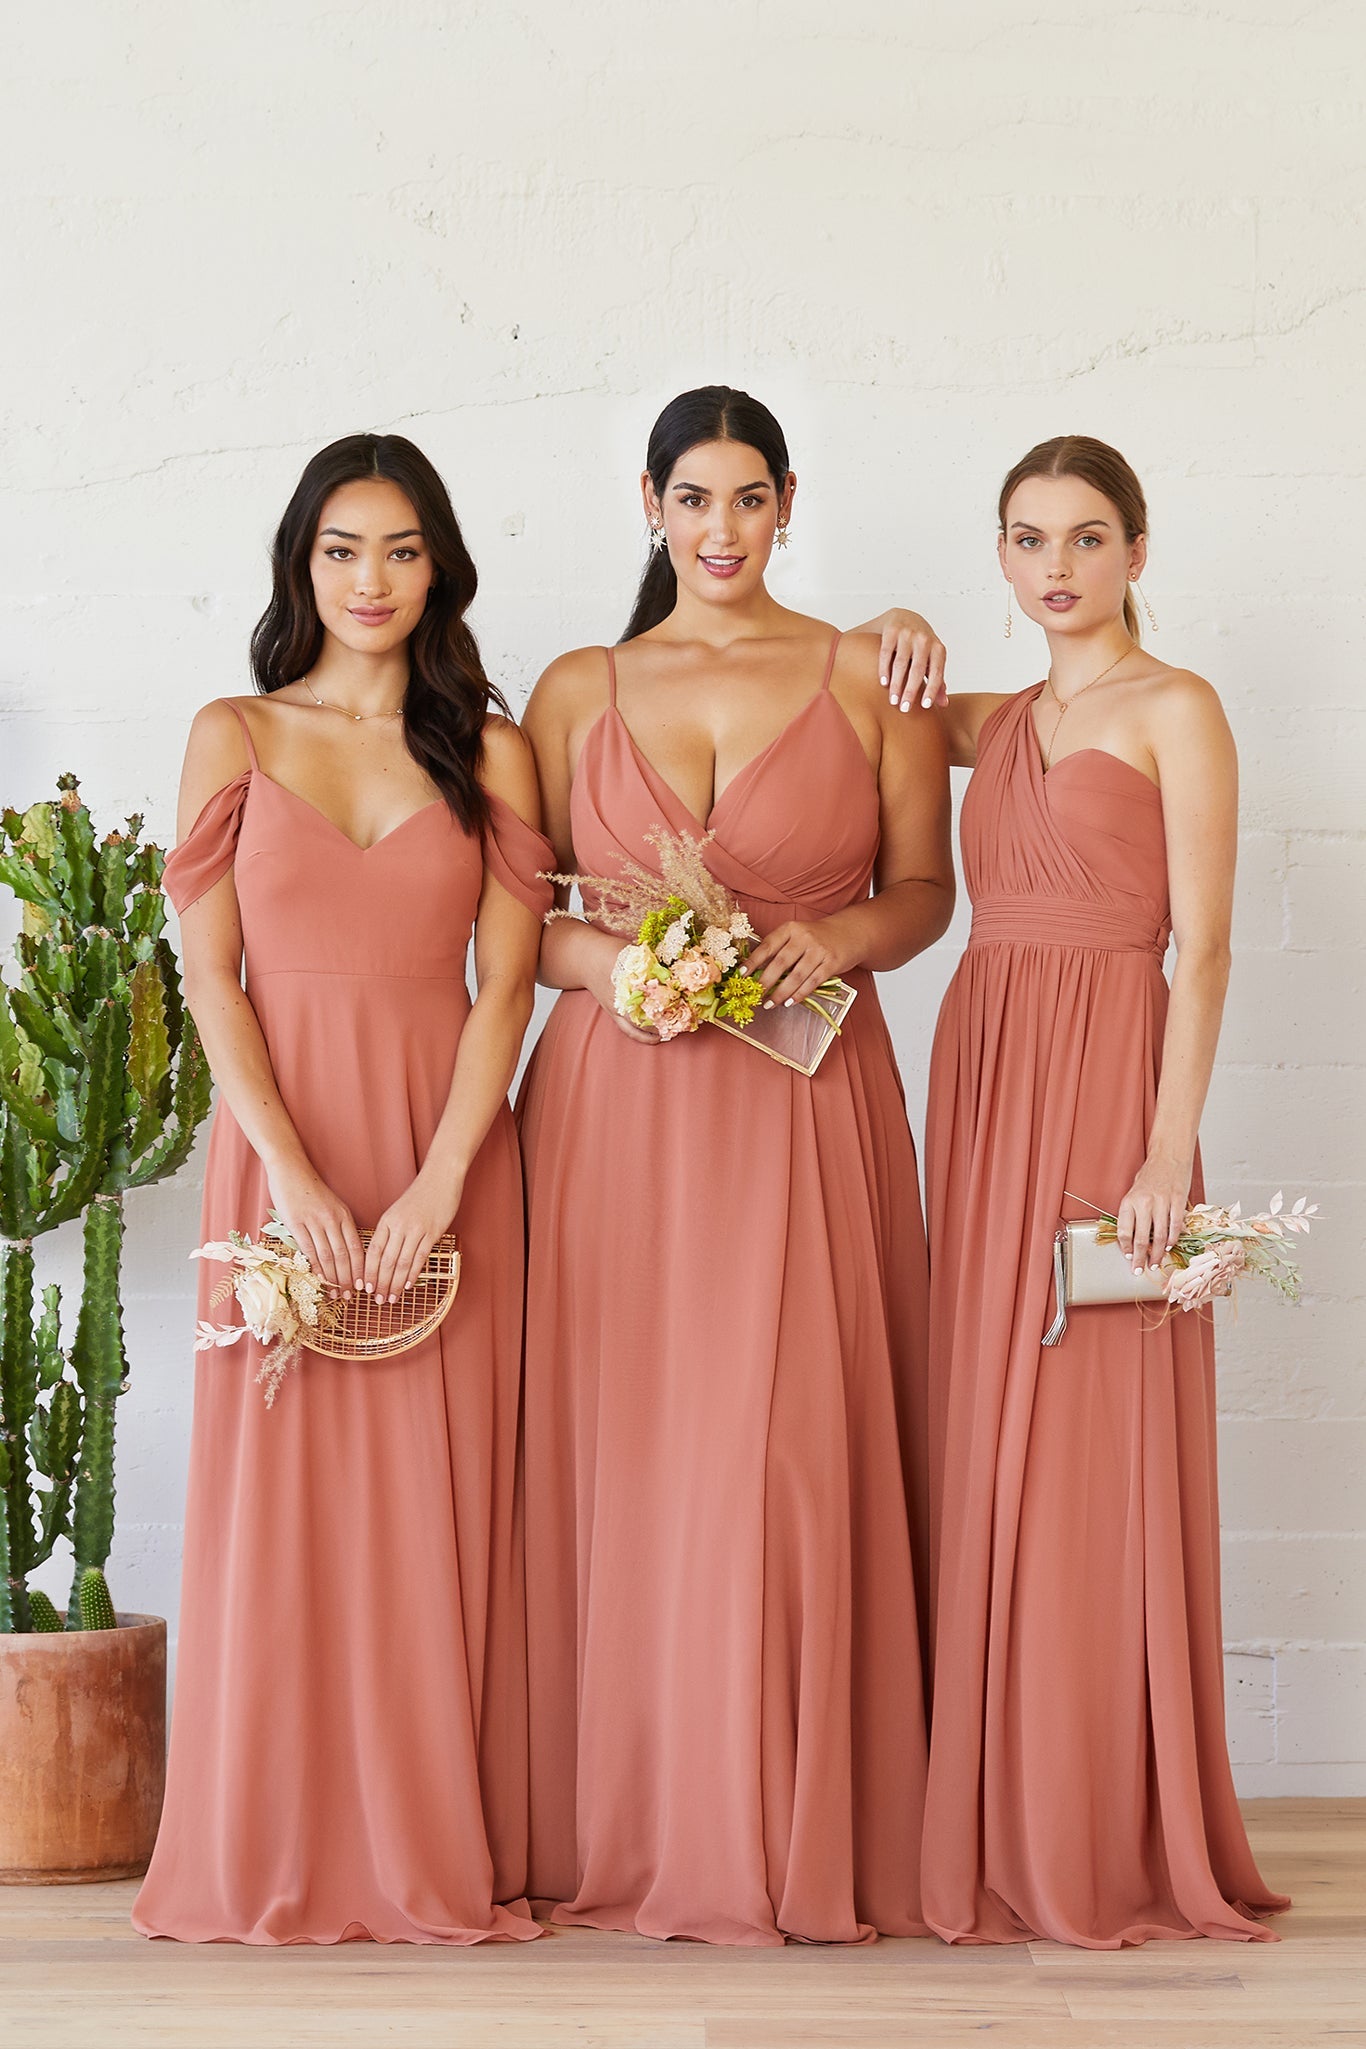 Front view shows three models with a light skin tone in different full-length dresses in terracotta. A slender model wears the Devon Convertible Dress. A full-figured model wears the Kaia Dress Curve. A slender model wears the Grace Convertible Dress. 